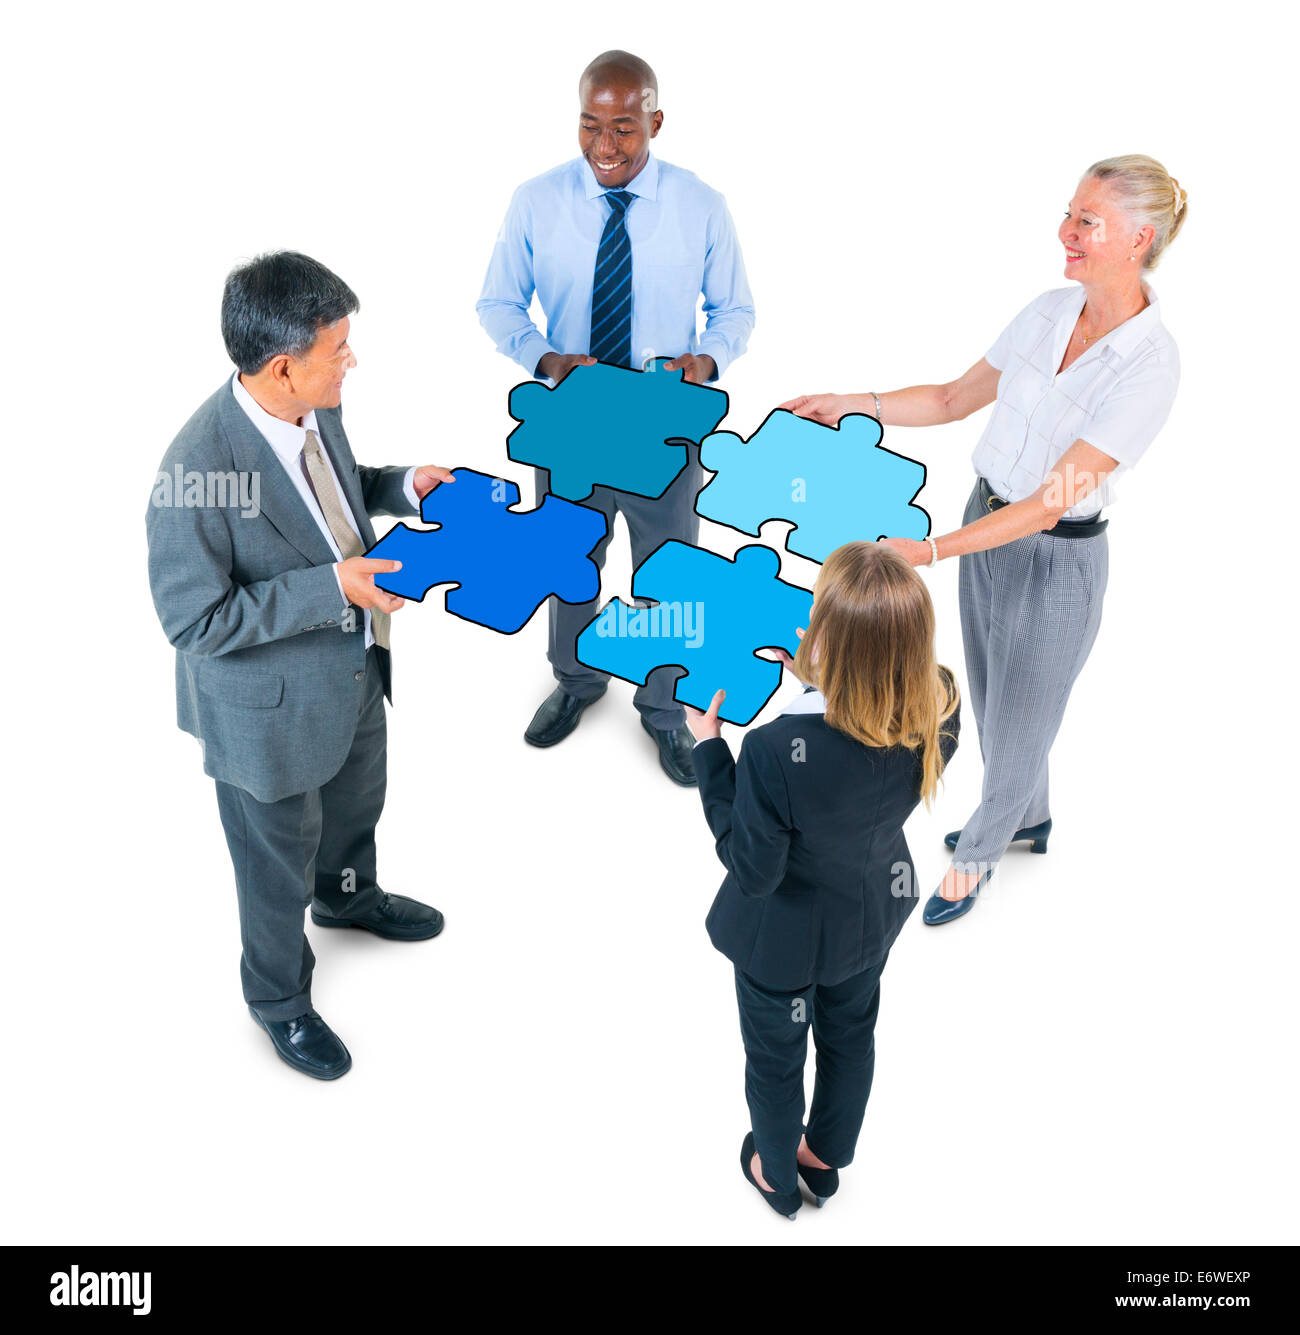 Group of Business People Connecting Jigsaw Puzzles Stock Photo - Alamy